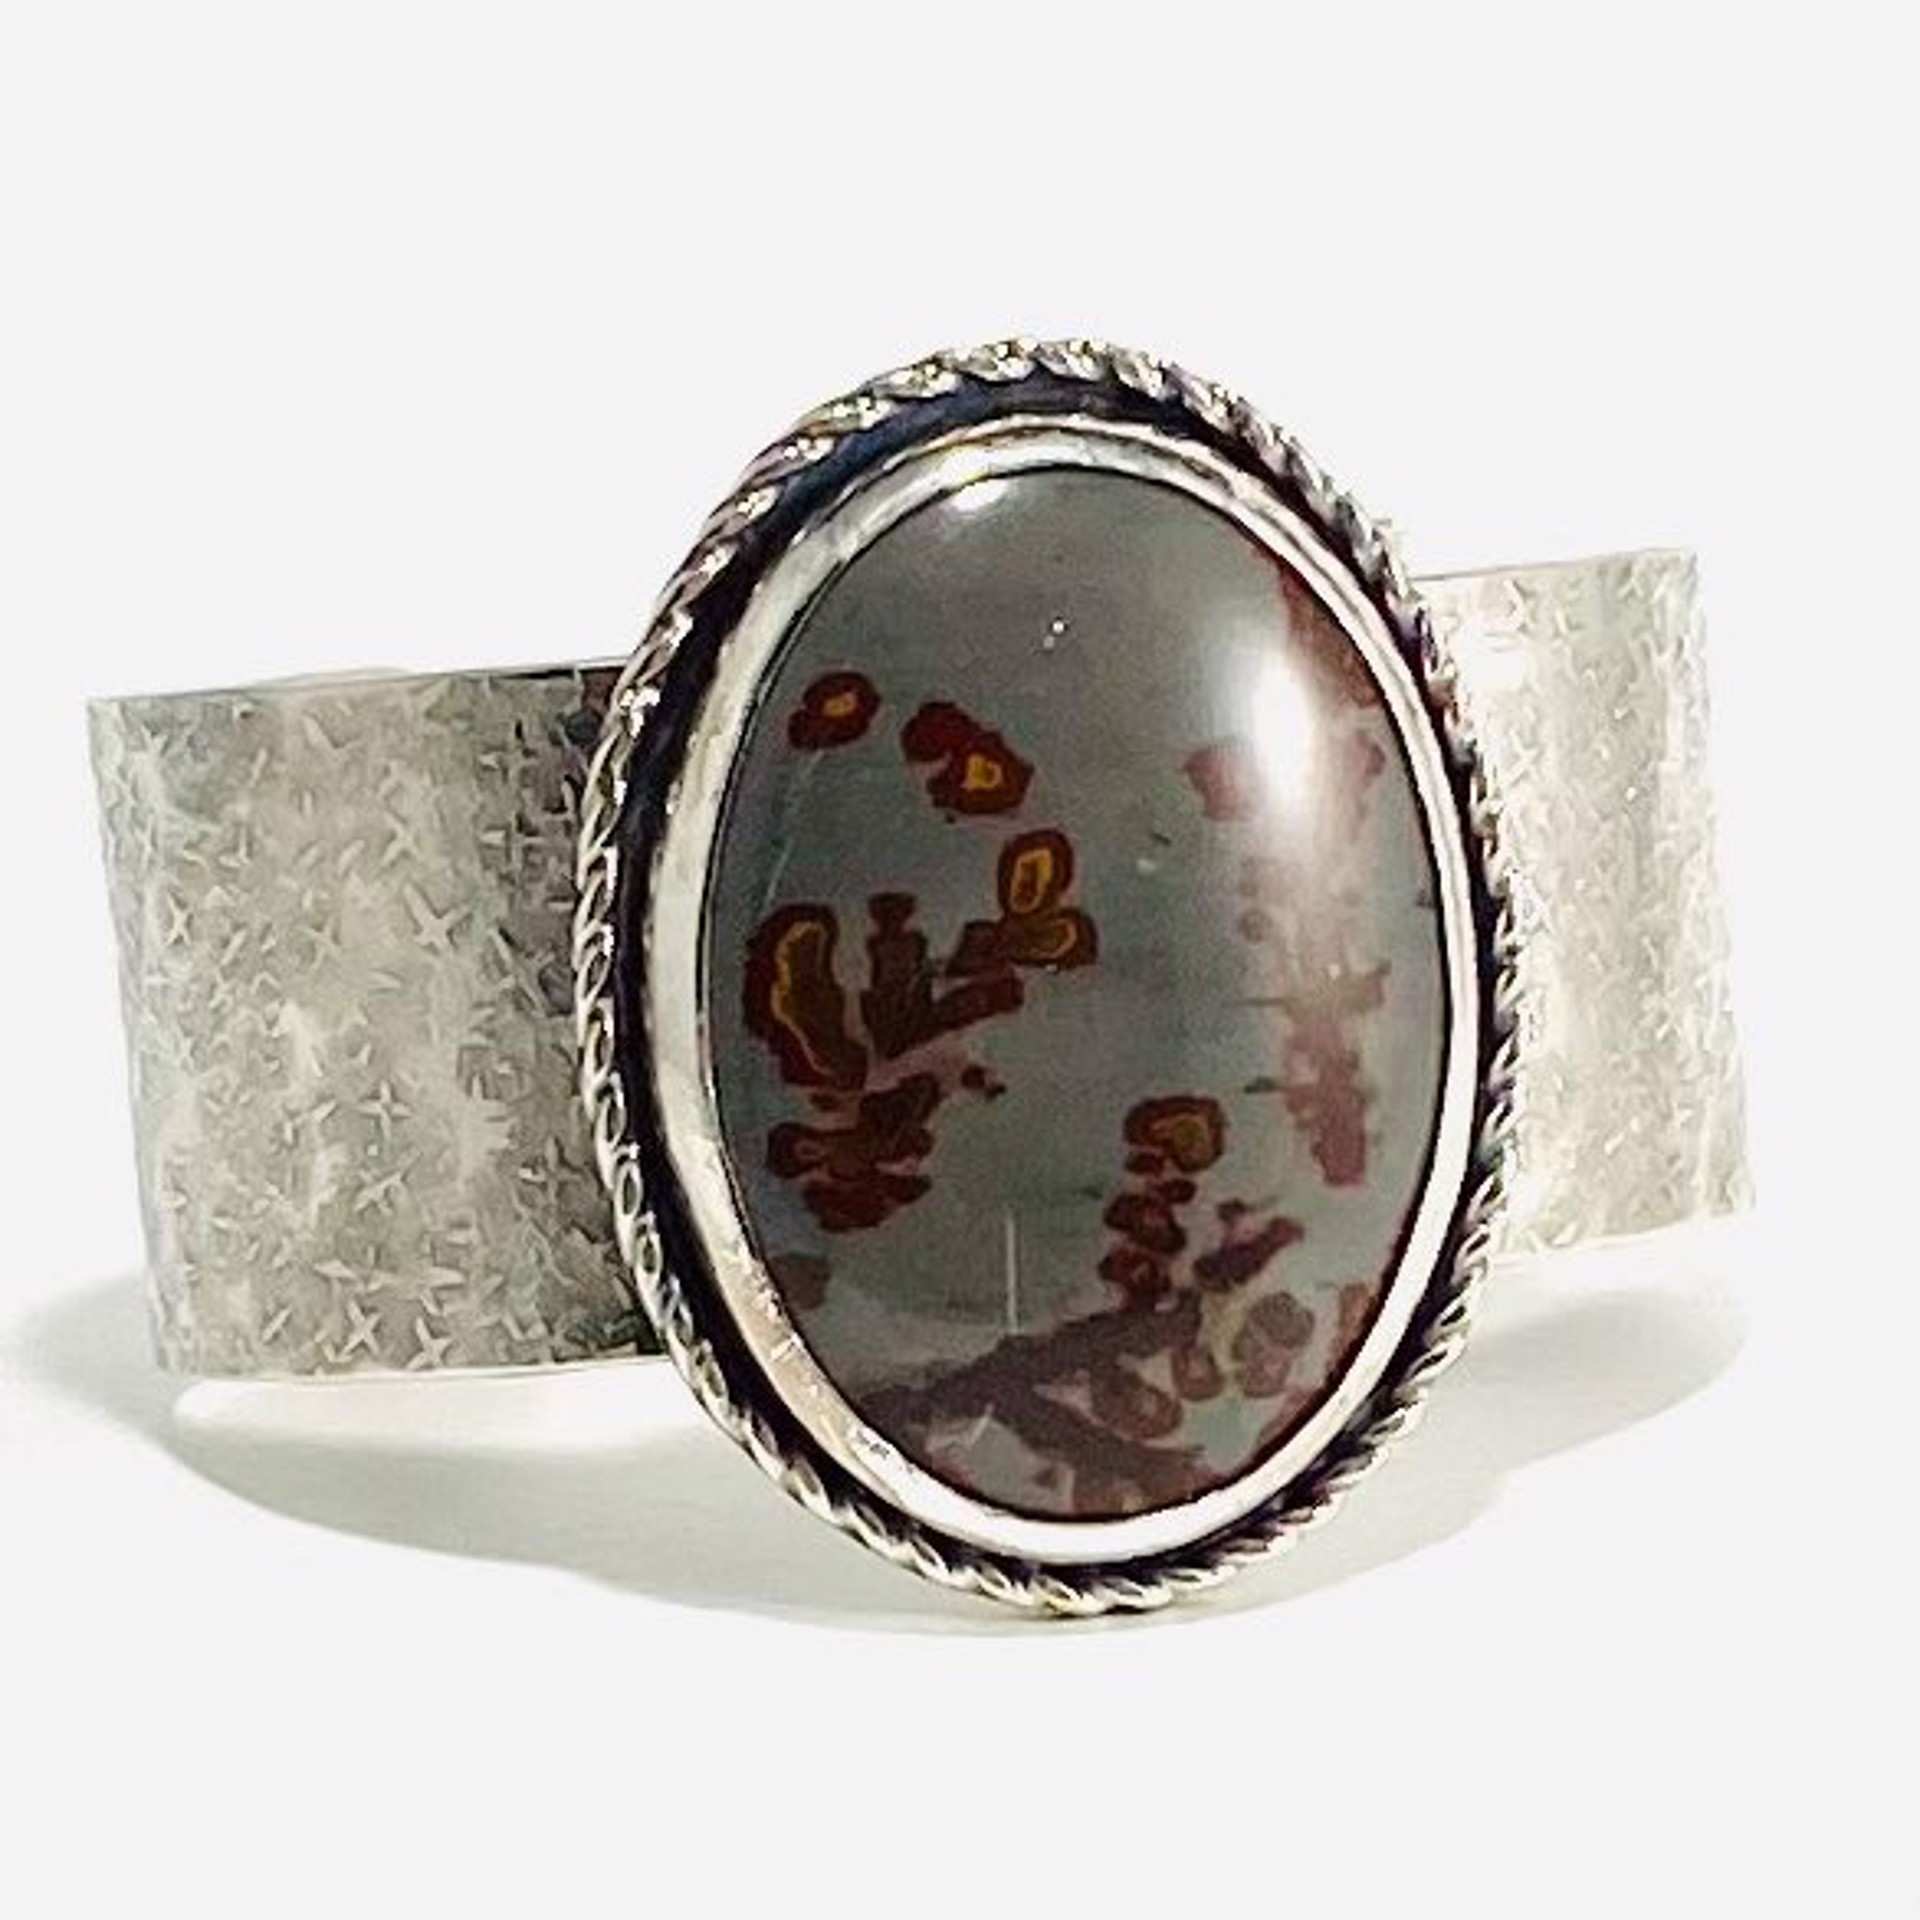 Large Oval Flower Jasper with Rope Bezel Silver Cuff Bracelet AB22-71 by Anne Bivens